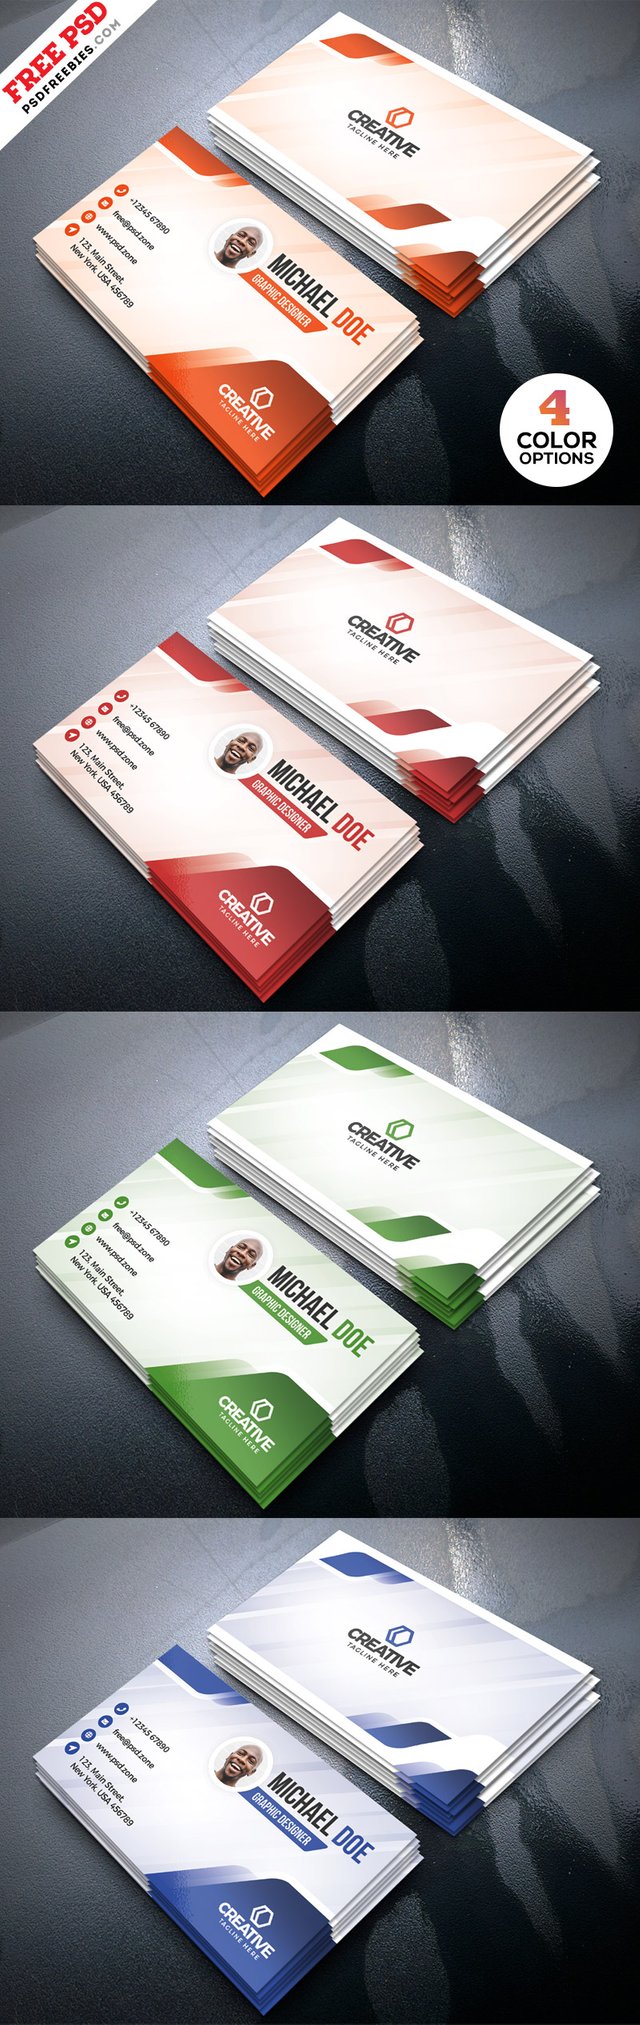 Creative-Business-Card-Designs-Free-PSD-Preview.jpg